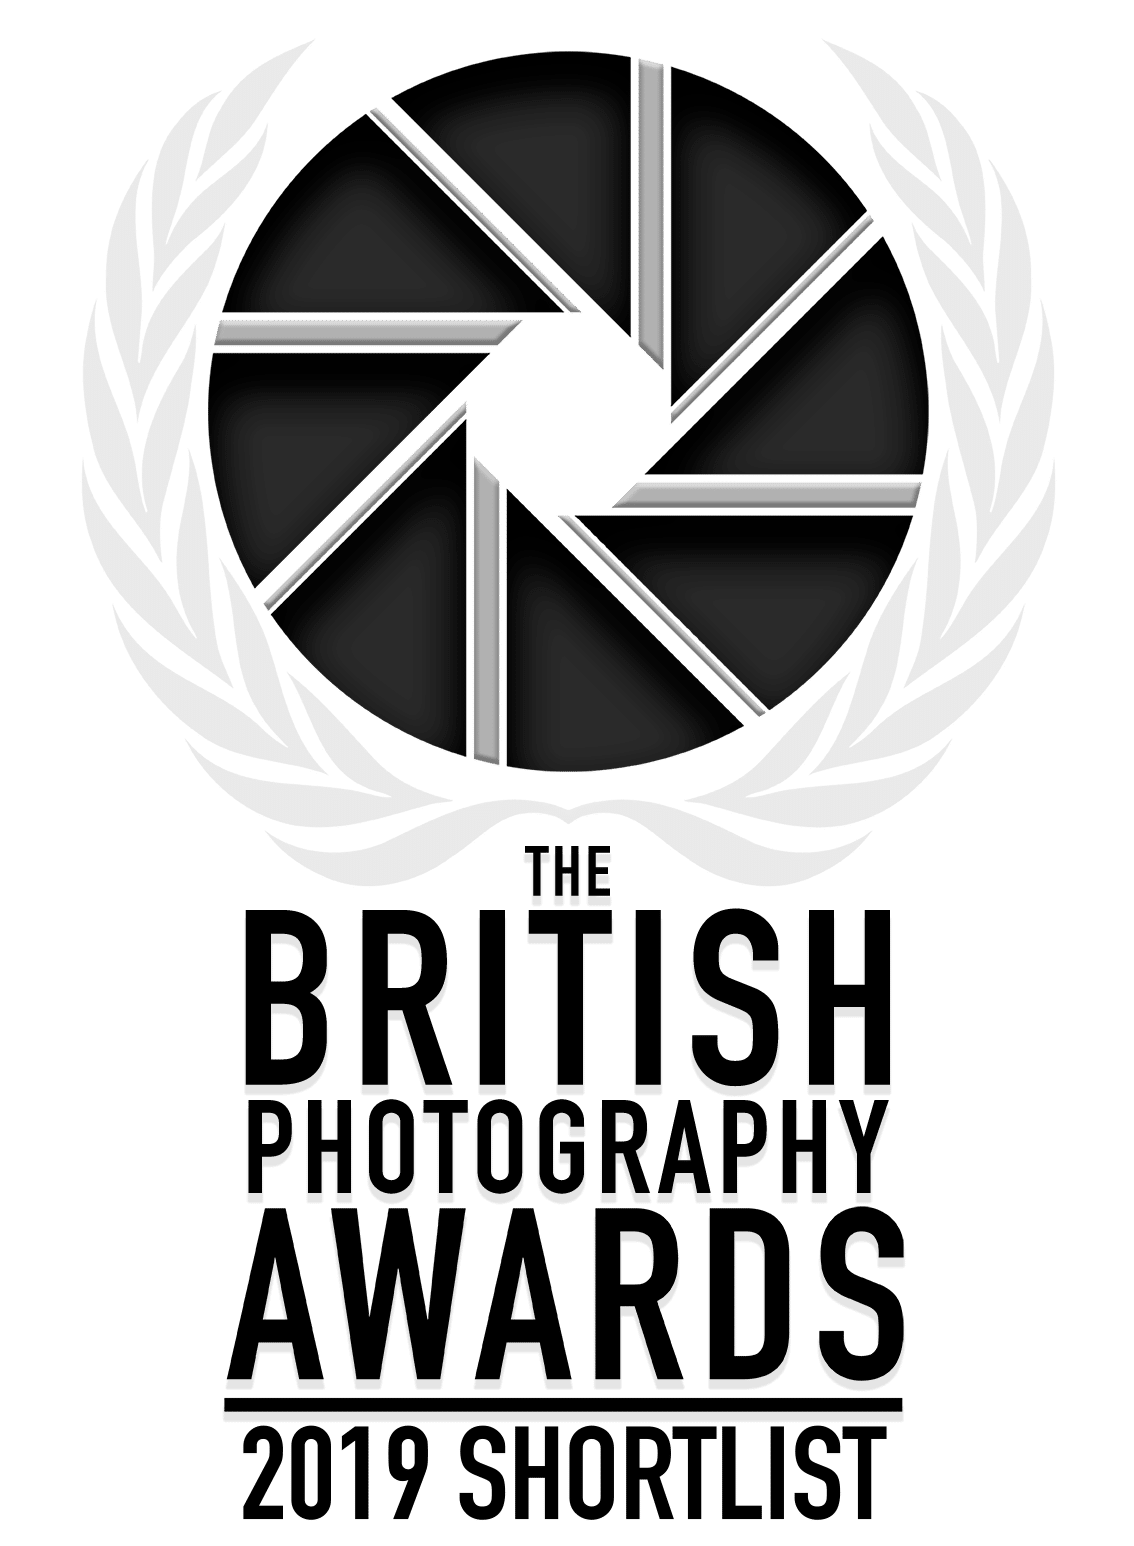 Algorithmic Photograph shortlisted for the British Photography Awards 2019